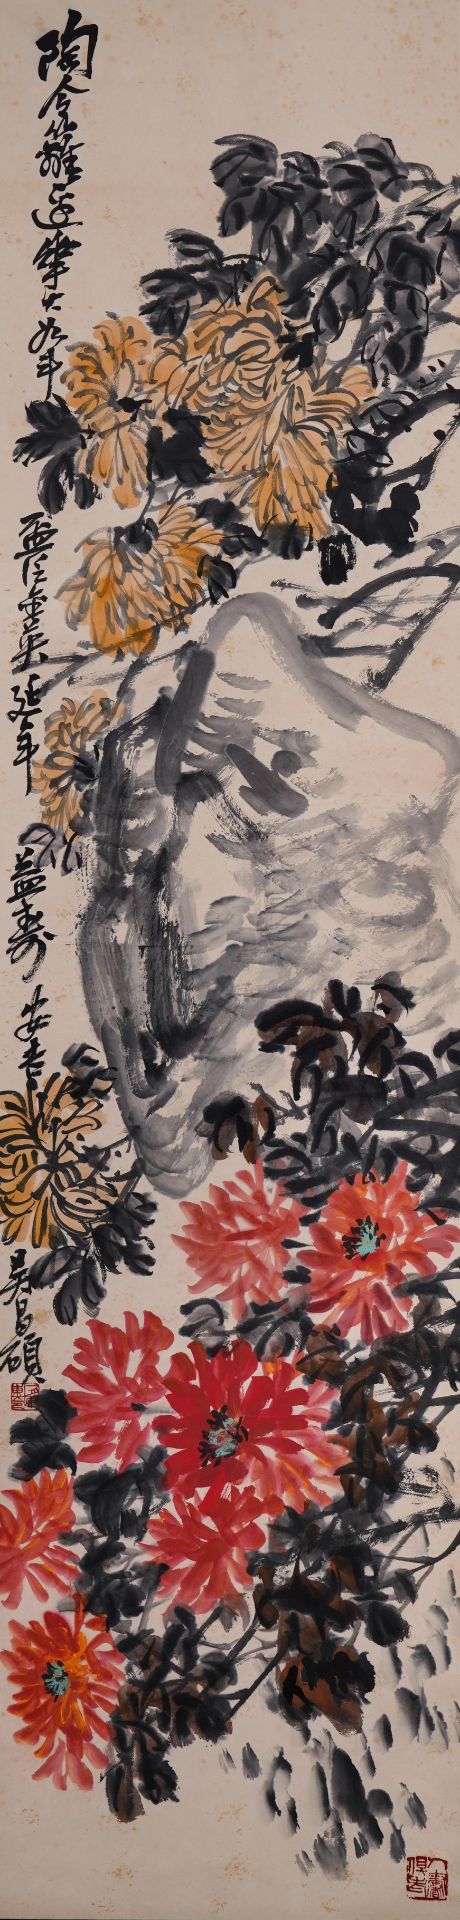 A Chinese Scroll Painting by Wu Changshuo - Bild 15 aus 27